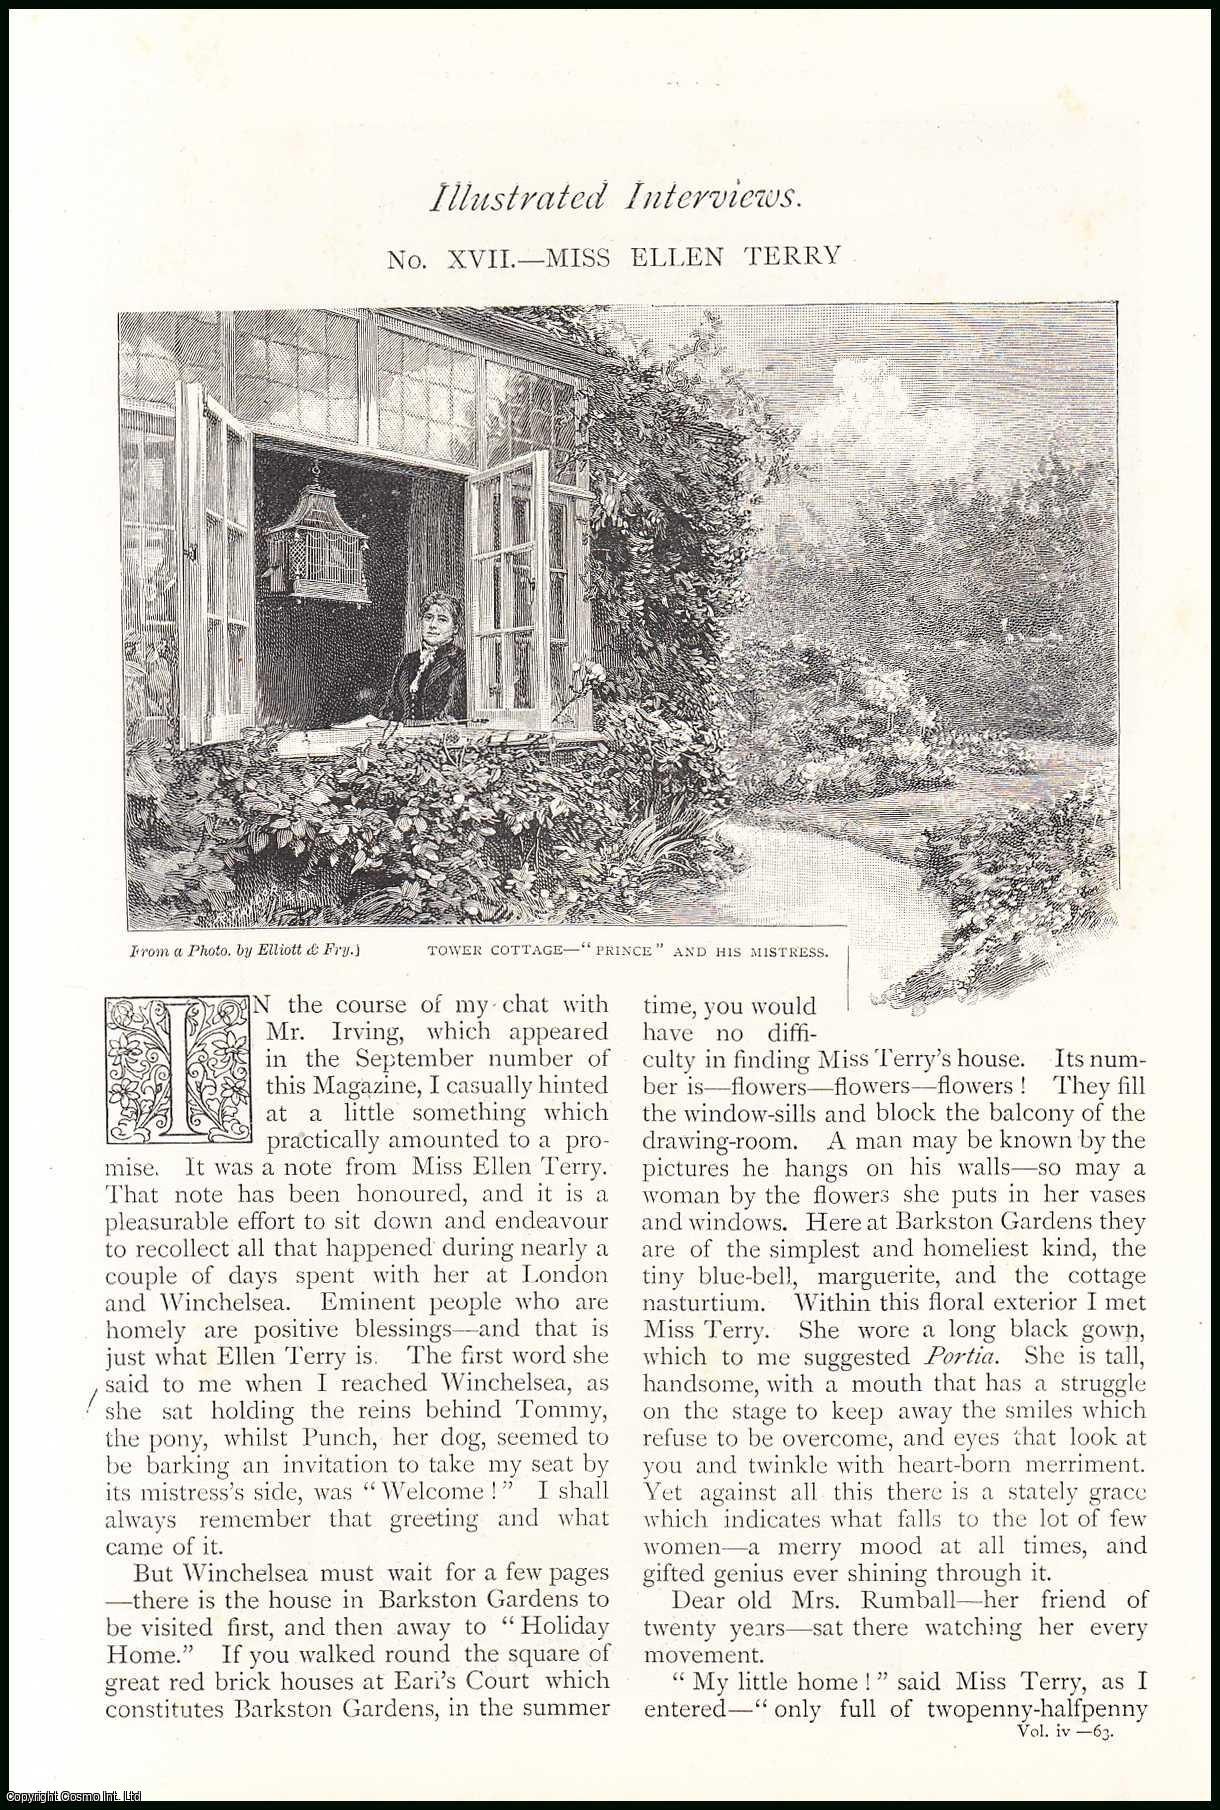 Harry How - Miss Ellen Terry, Actress. Illustrated Interviews. An original article from The Strand Magazine, 1892.